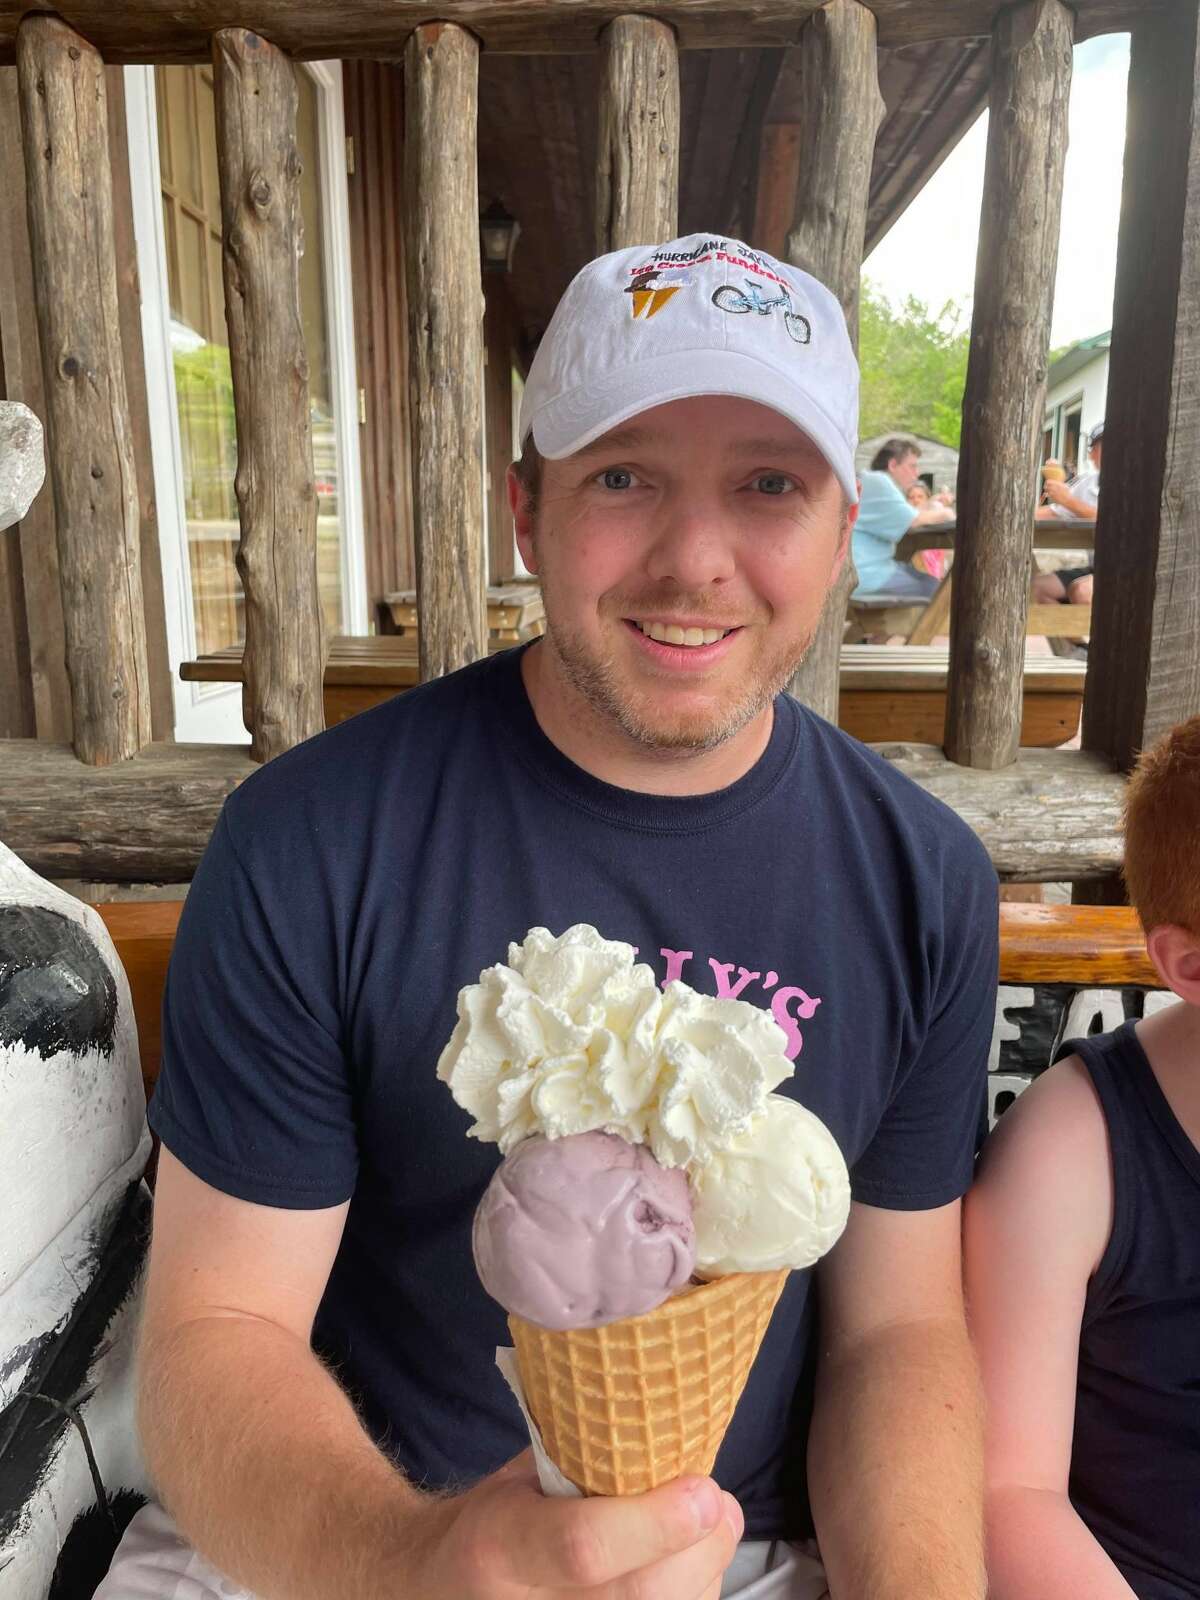 Craig Behun, the voice behind the CT Ice Cream Tour Instagram account, has visited over 200 ice cream shops in Connecticut to sample their homemade flavors. 